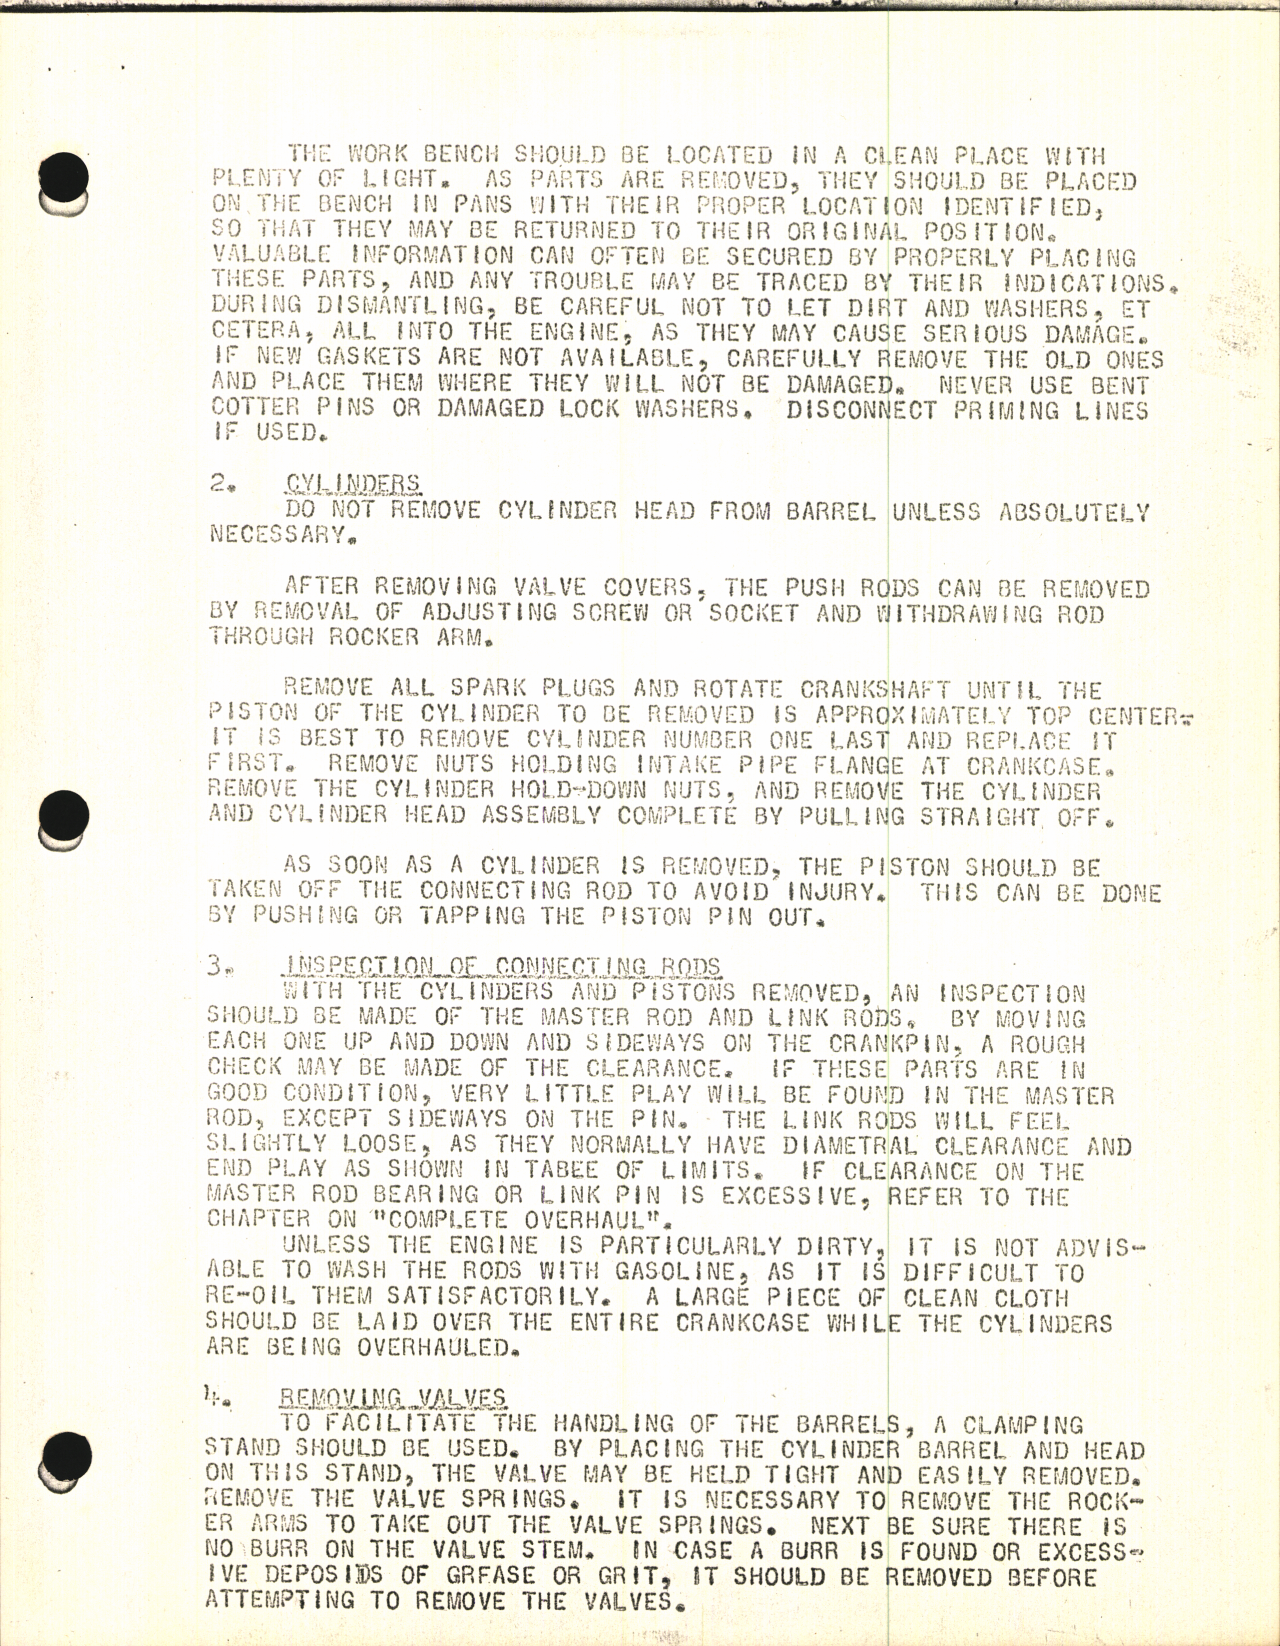 Sample page 7 from AirCorps Library document: Instructions for Overhaul for Kinner R-52, R-55, and R-53 Aircraft Engines